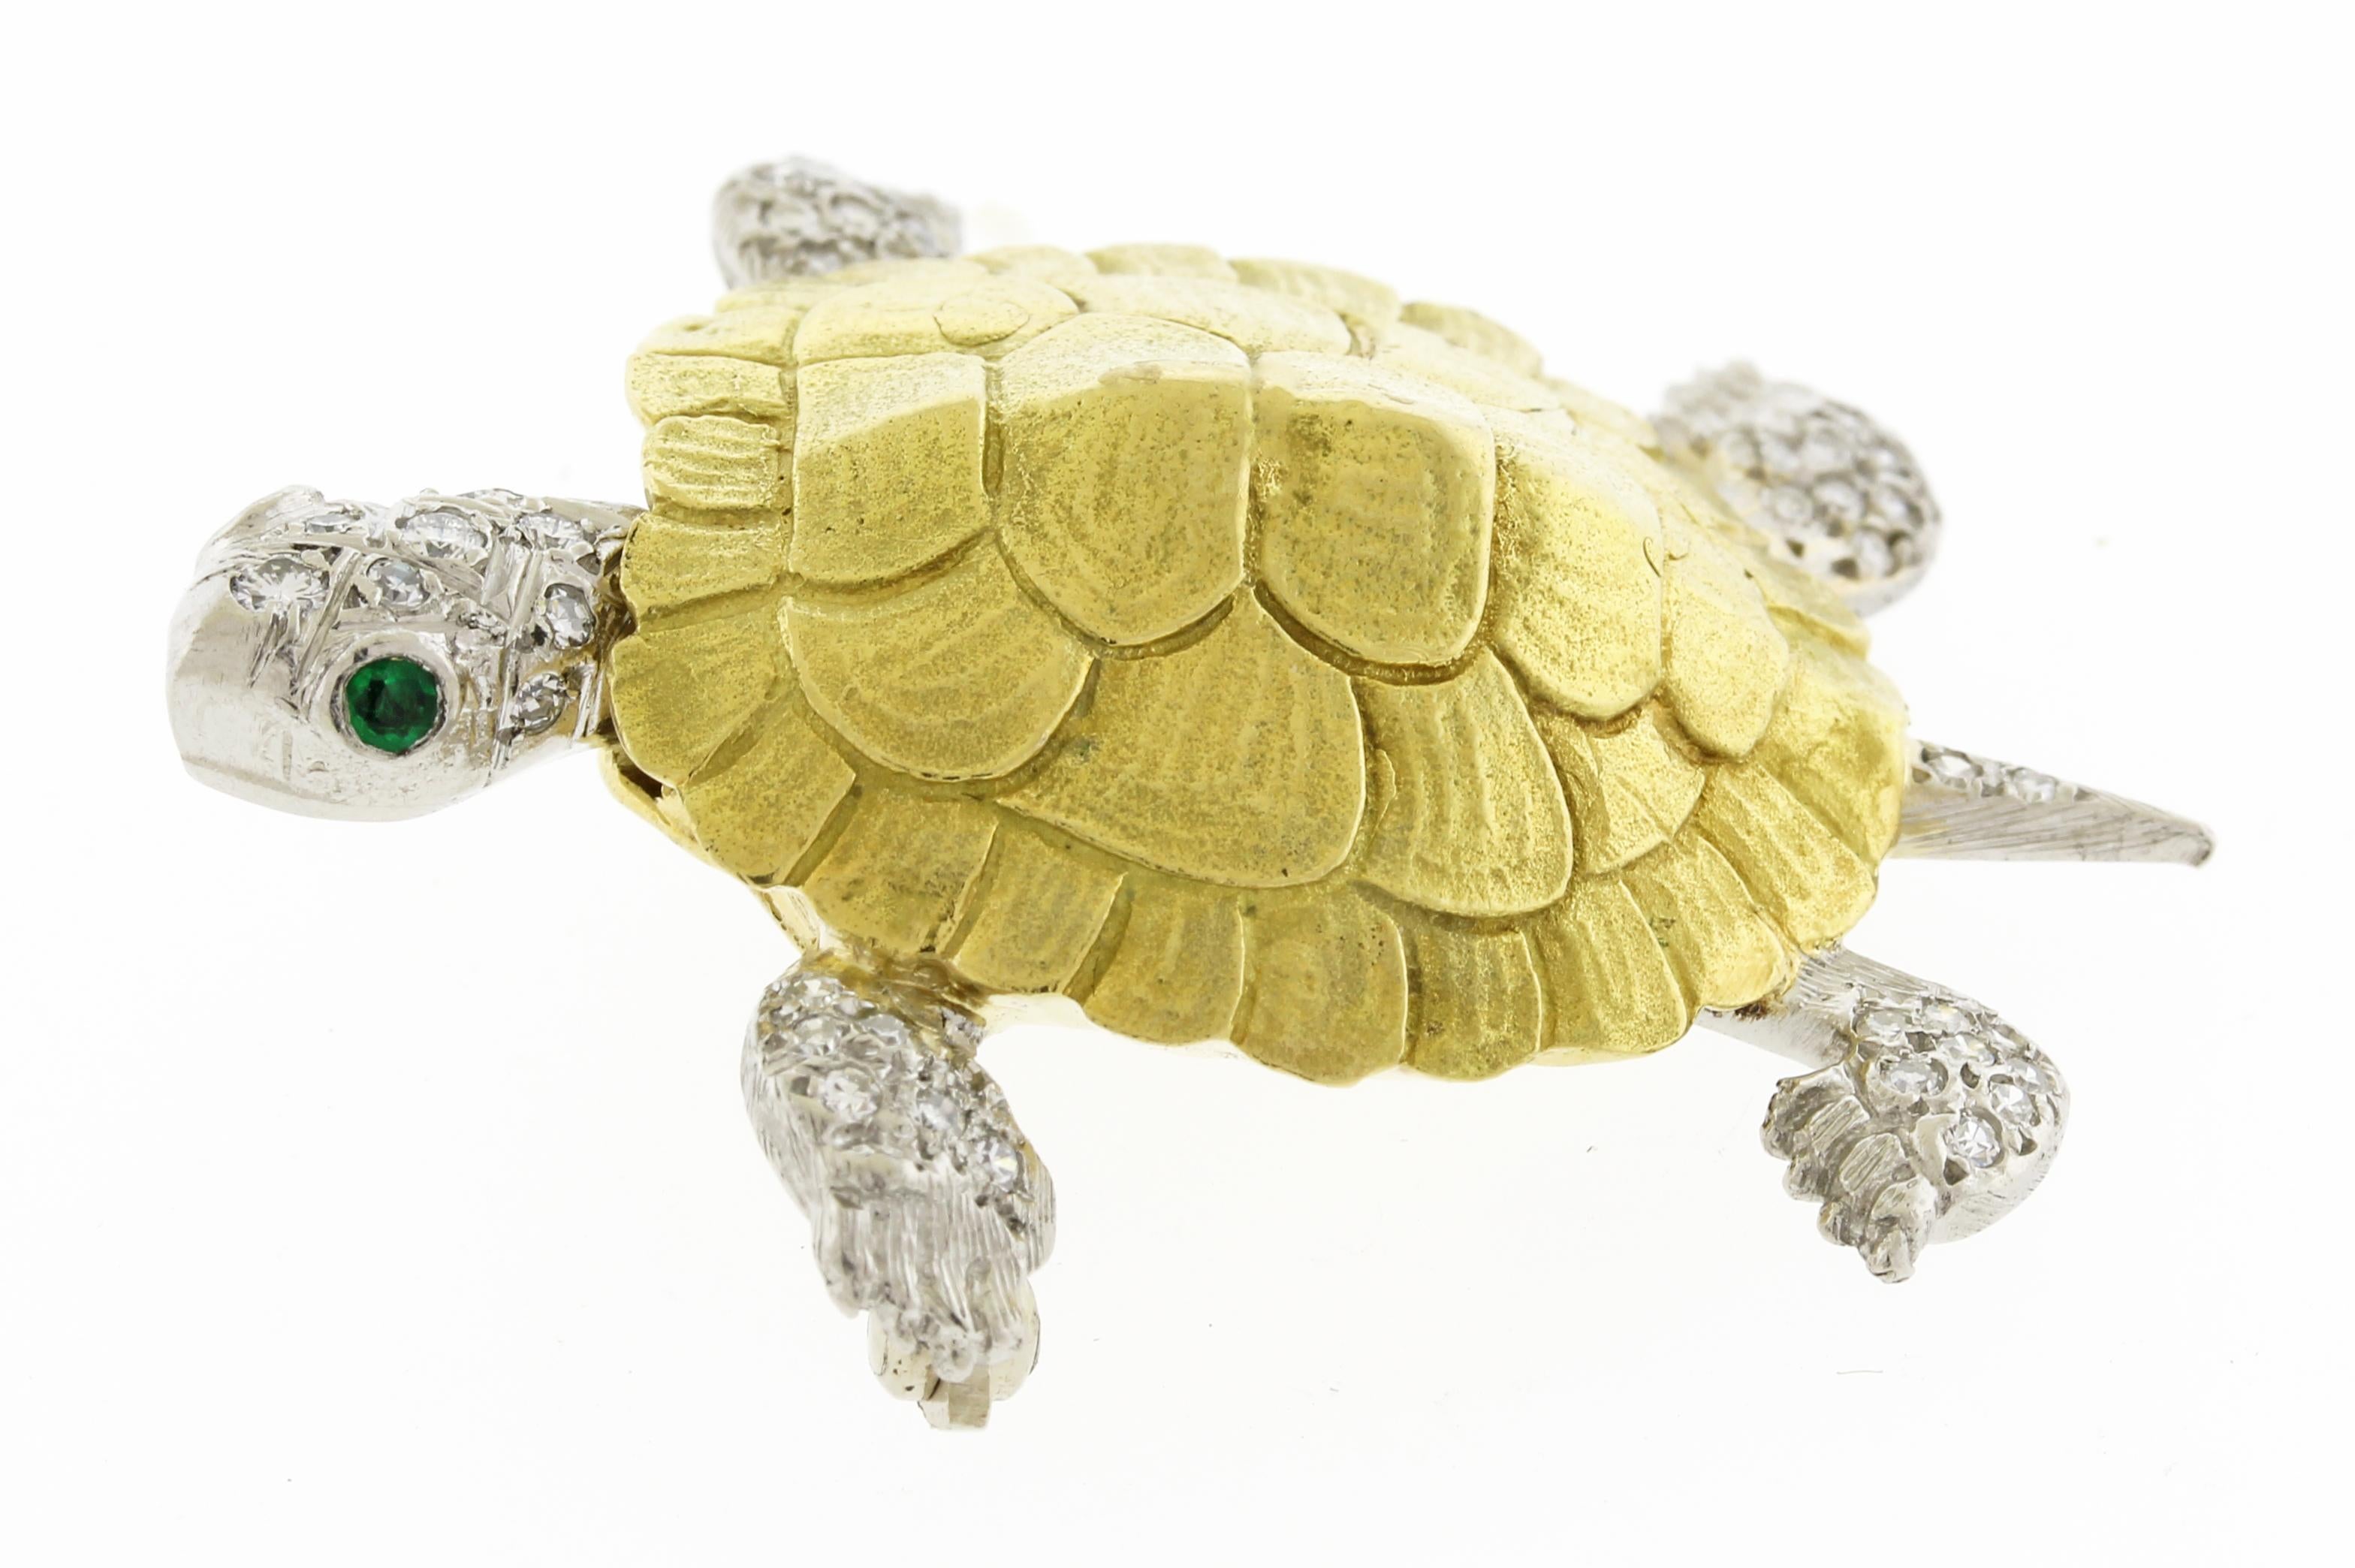 From McTeigue, this turtle brooch has a moveable head with 2 emerald eyes. The fine detail and texture of the turtles shell is a work of art.
• Metal: 18kt Yellow Gold and Platinum
• Designer: McTeigue
• Circa: 1970’s
• Gemstone: Diamonds and